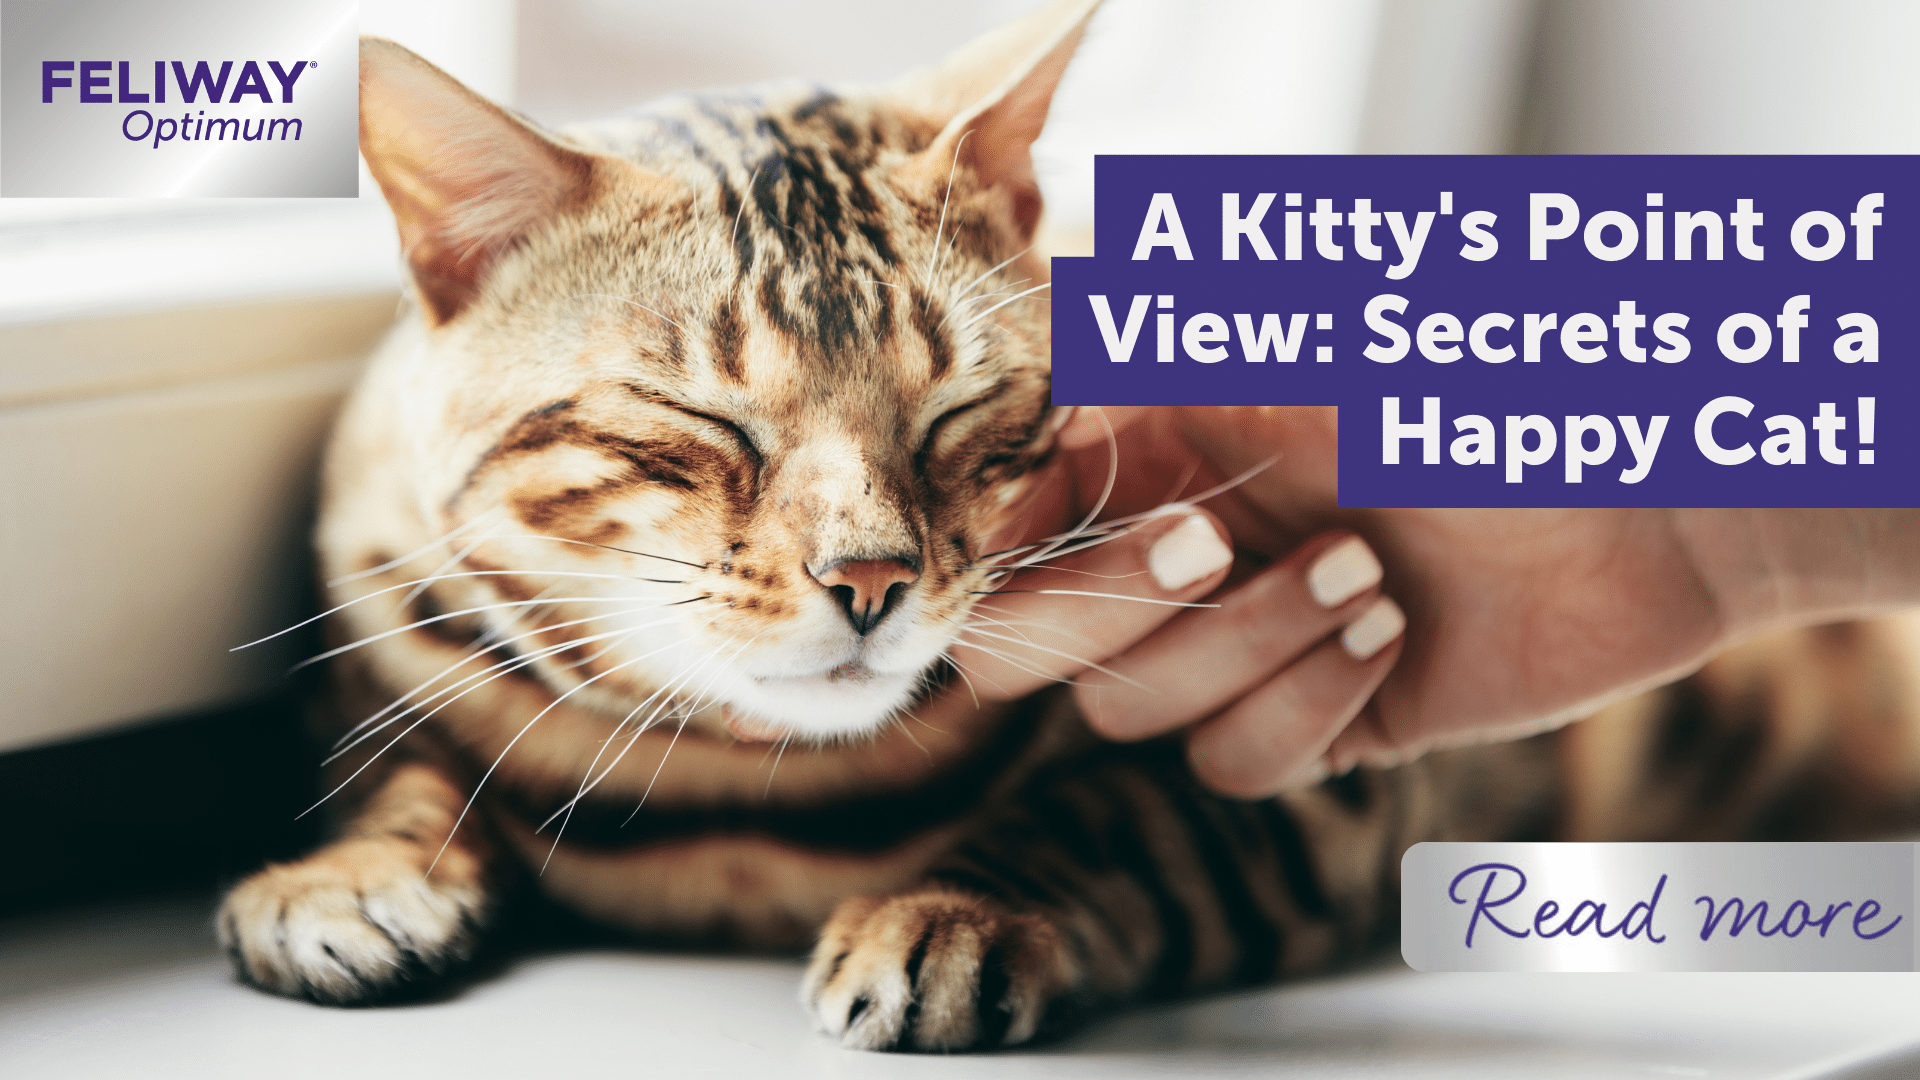 A Kitty's Point of View: Secrets of a Happy Cat!